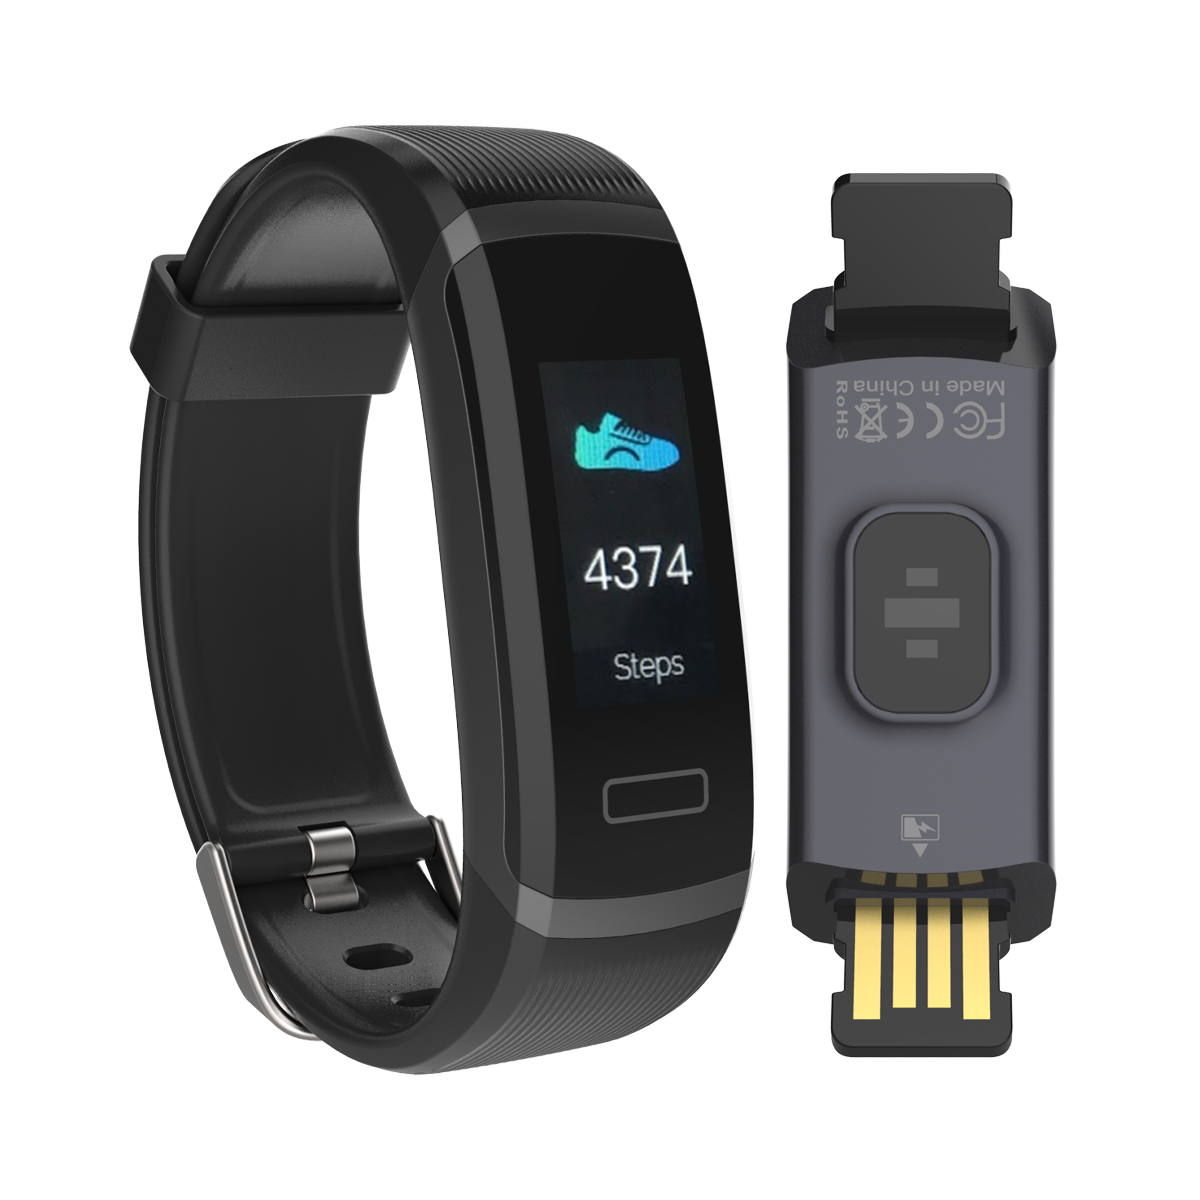 Tenvis HR - Fitness trackers